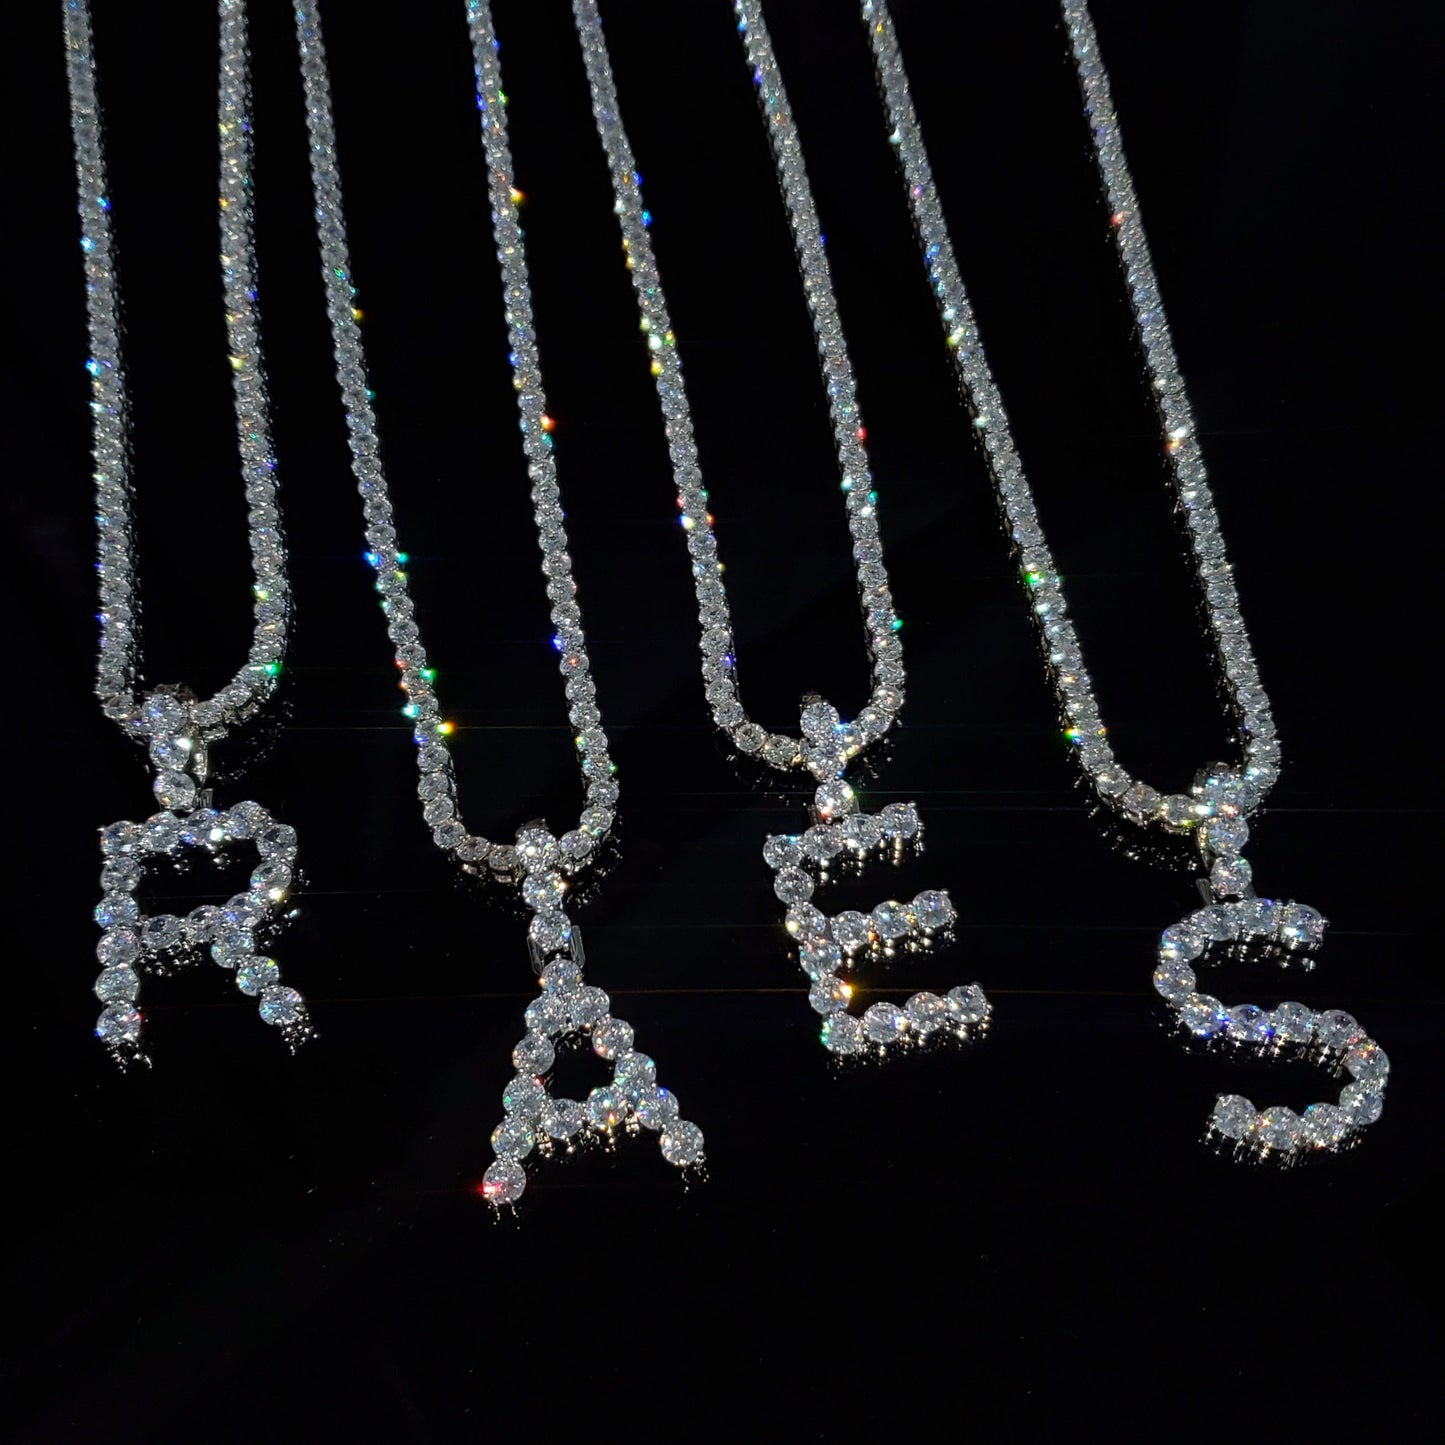 'First 26' Bling Iced Out Initial Pendant Tennis Chain Necklaces by Bling Addict | BlingxAddict